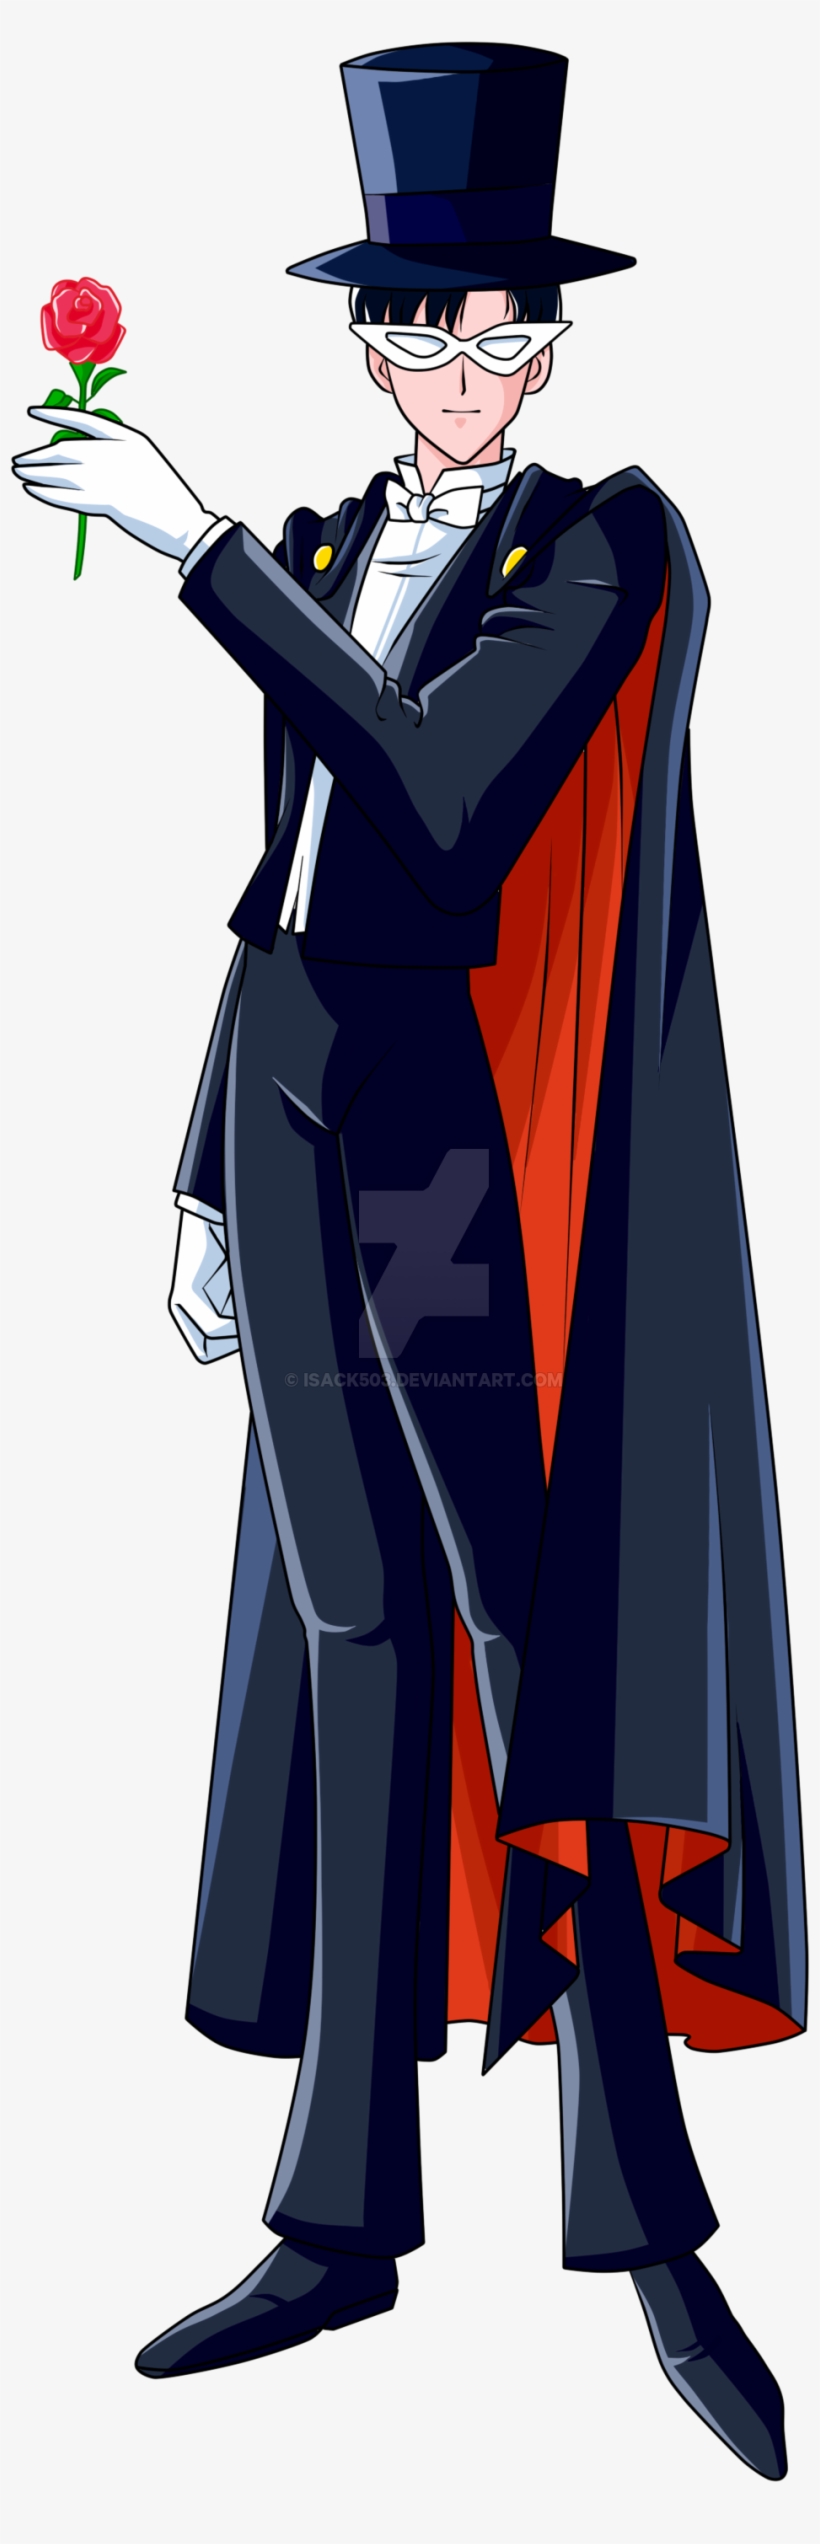 Tuxedo Mask Vector By Isack503-d9h7uzf - Tuxedo Mask Png, transparent png #2938255